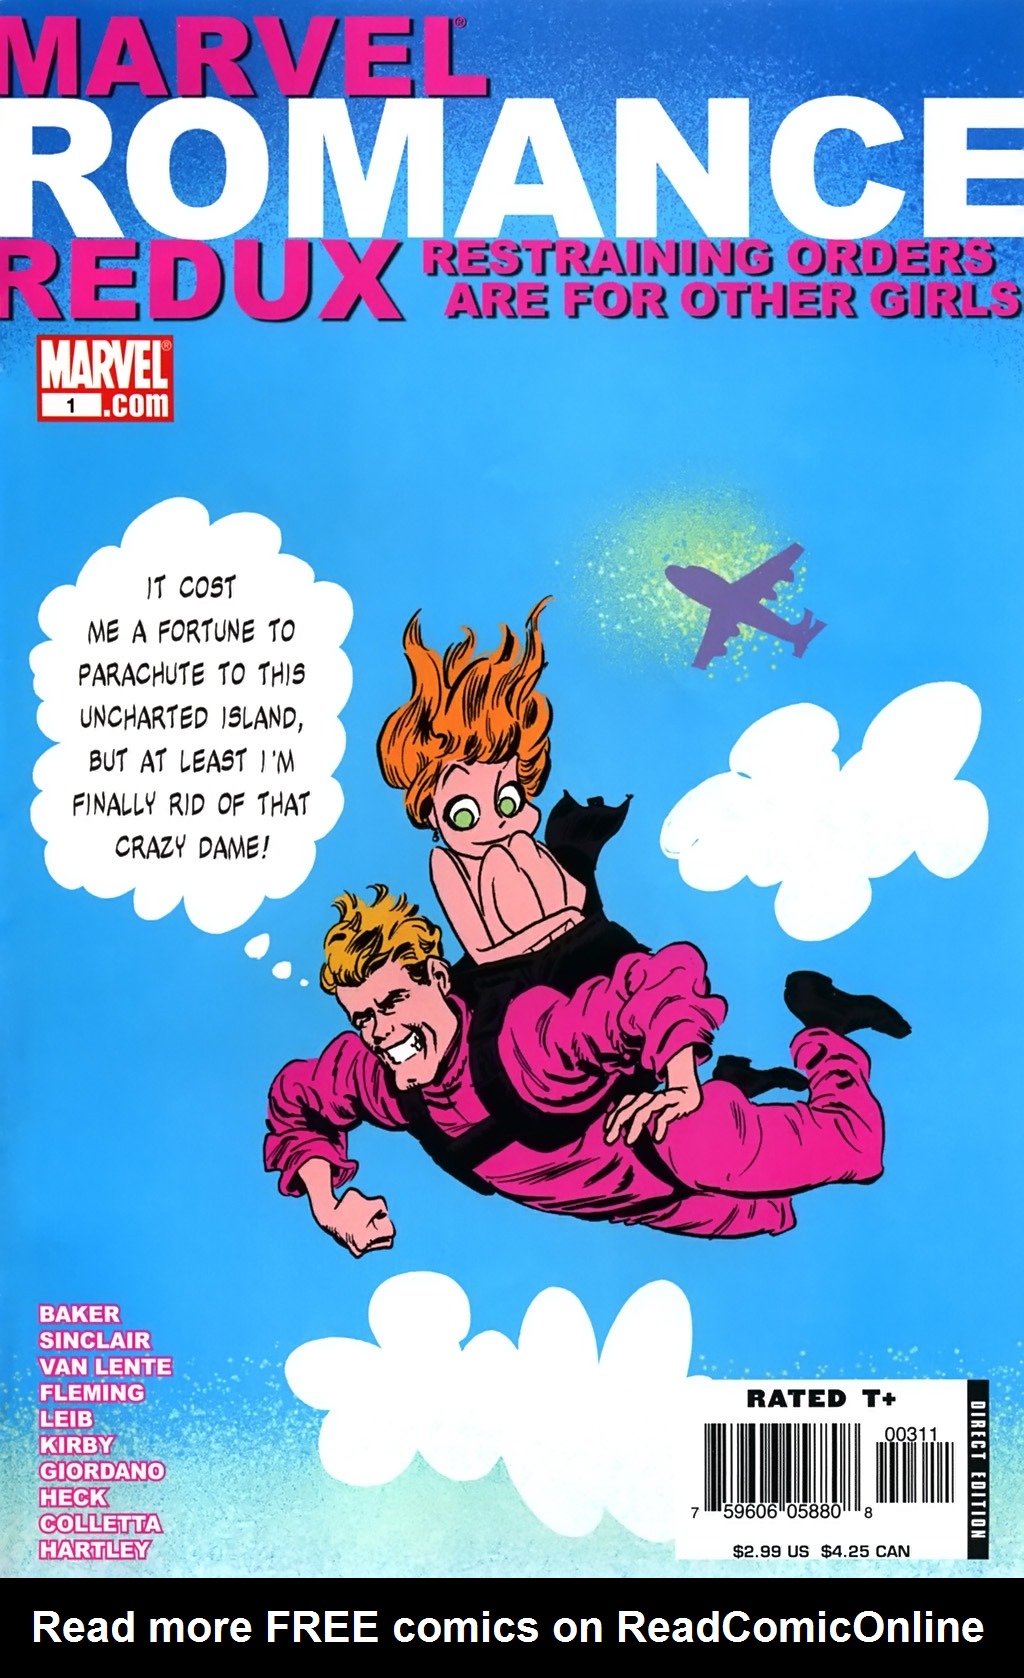 Read online Marvel Romance Redux comic -  Issue # Restraining Orders Are For Other Girls - 1